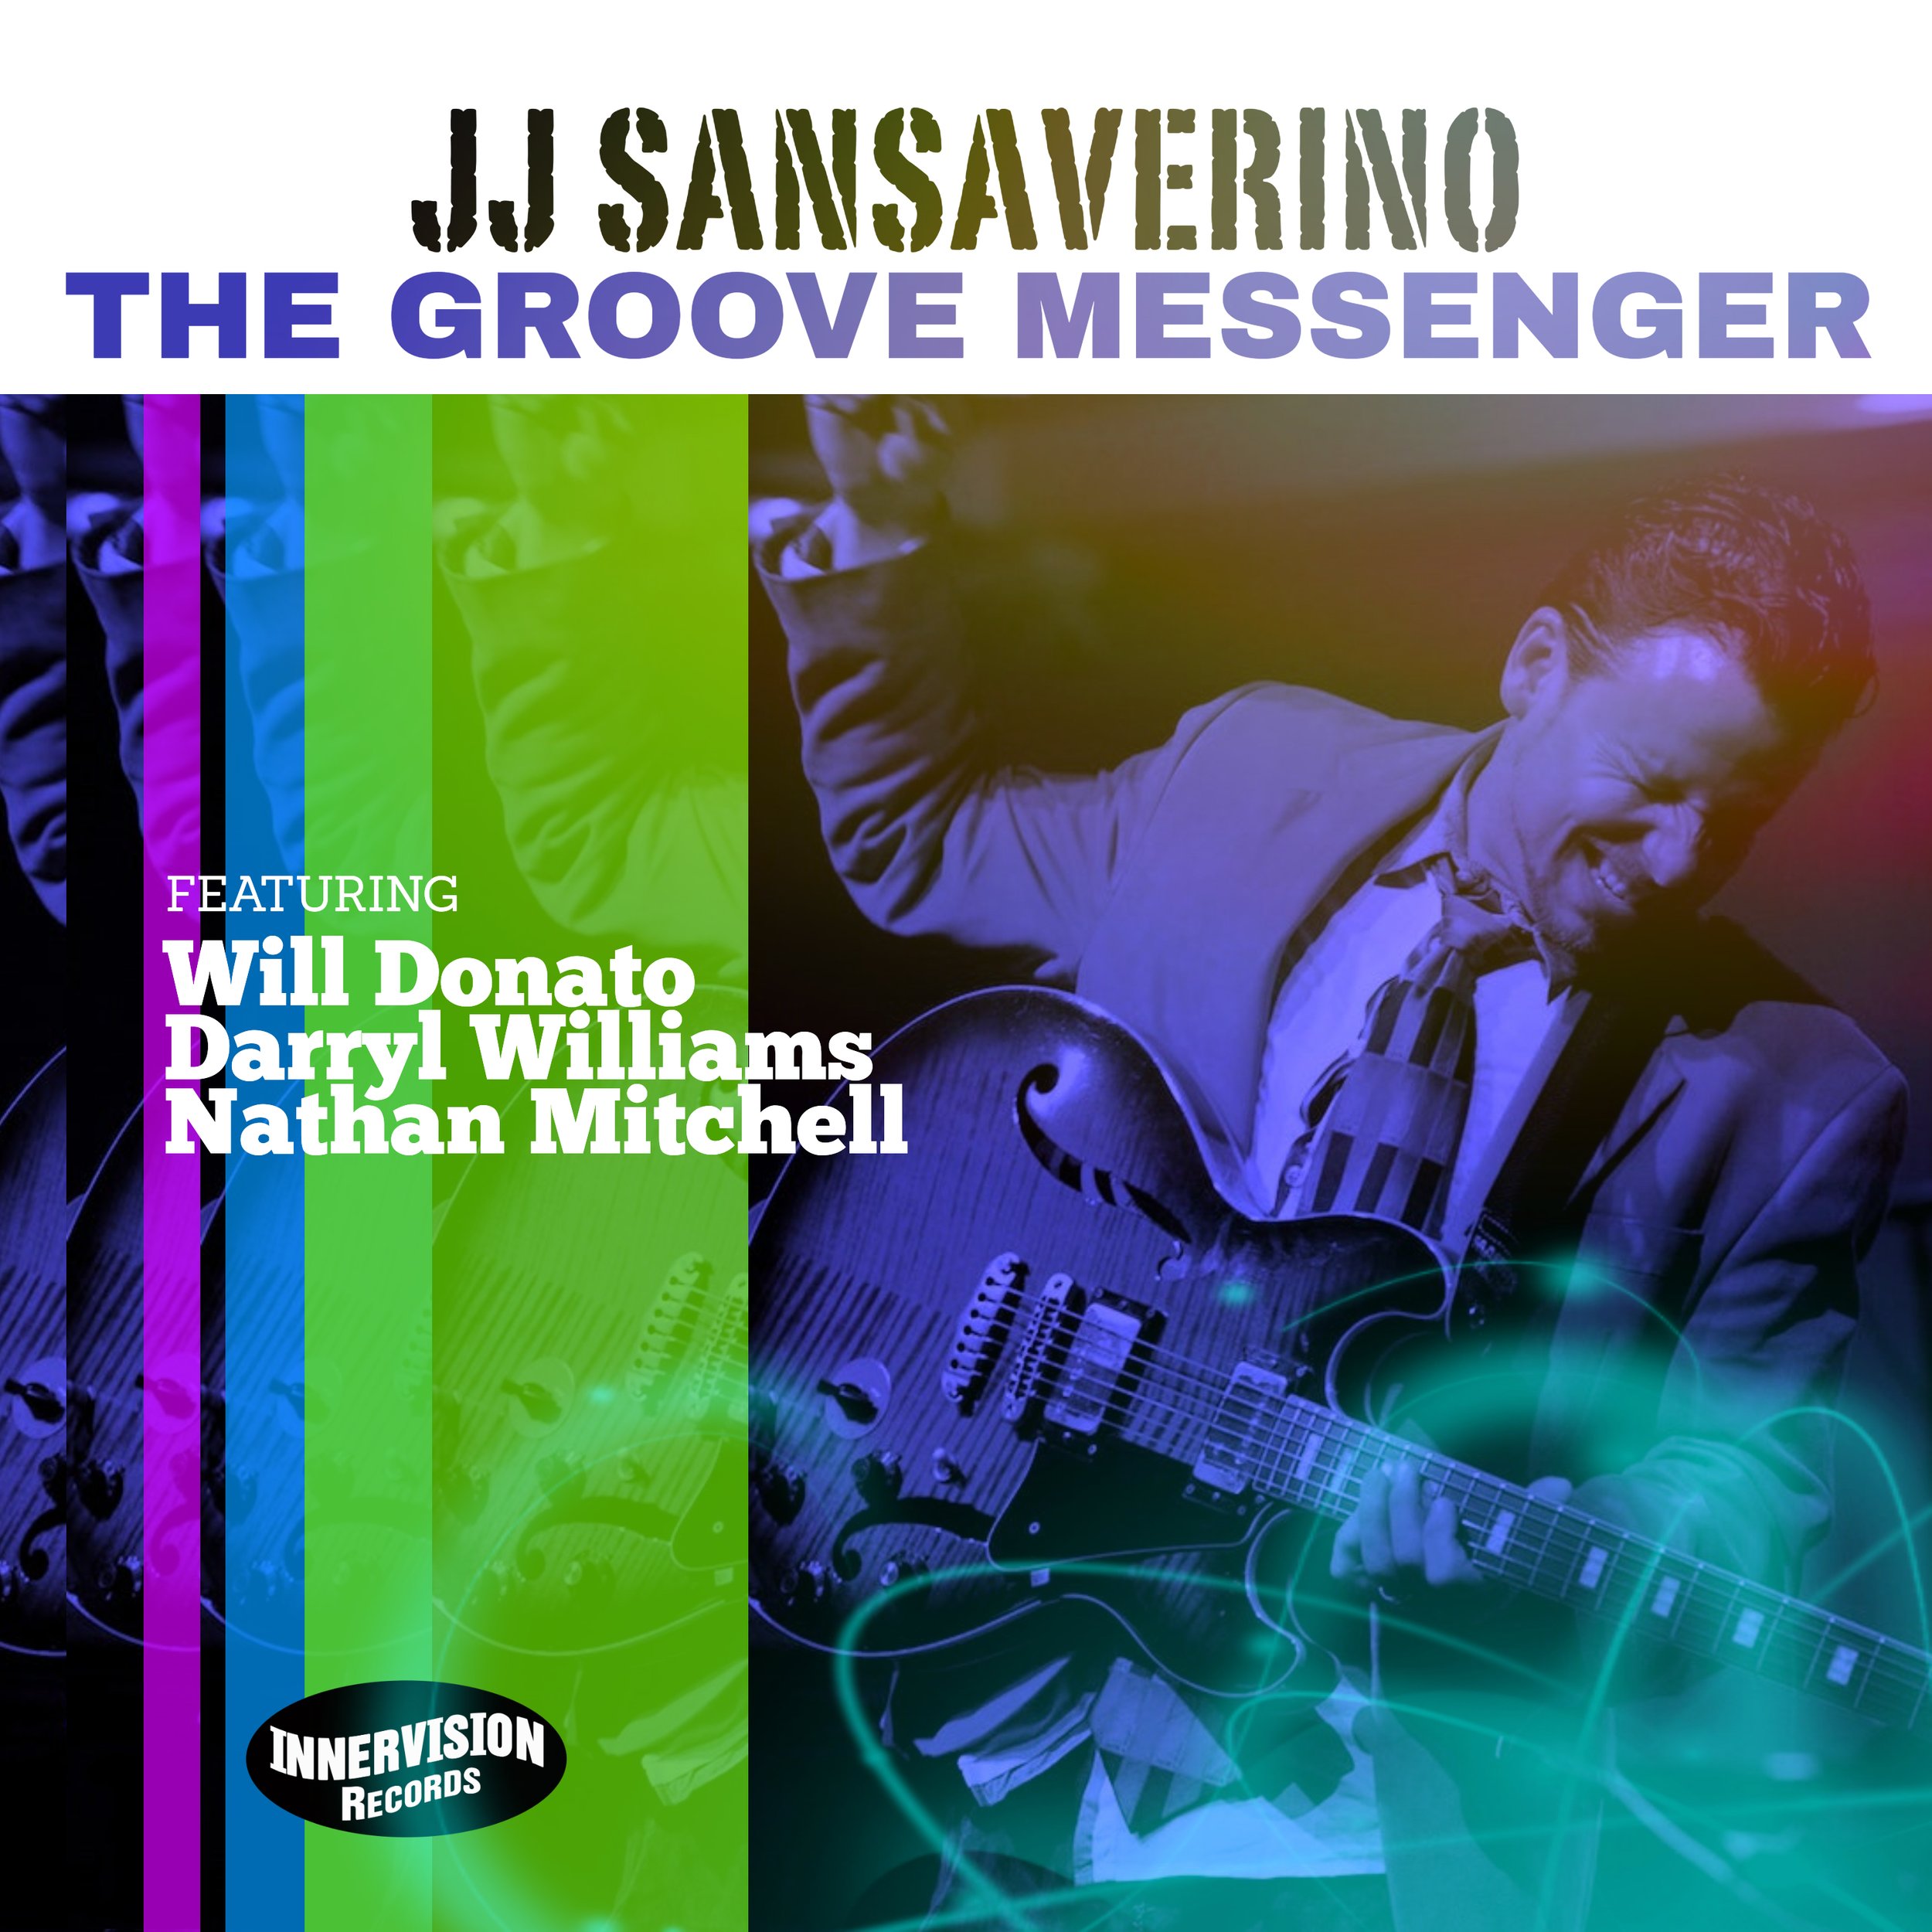 THE GROOVE MESSENGER